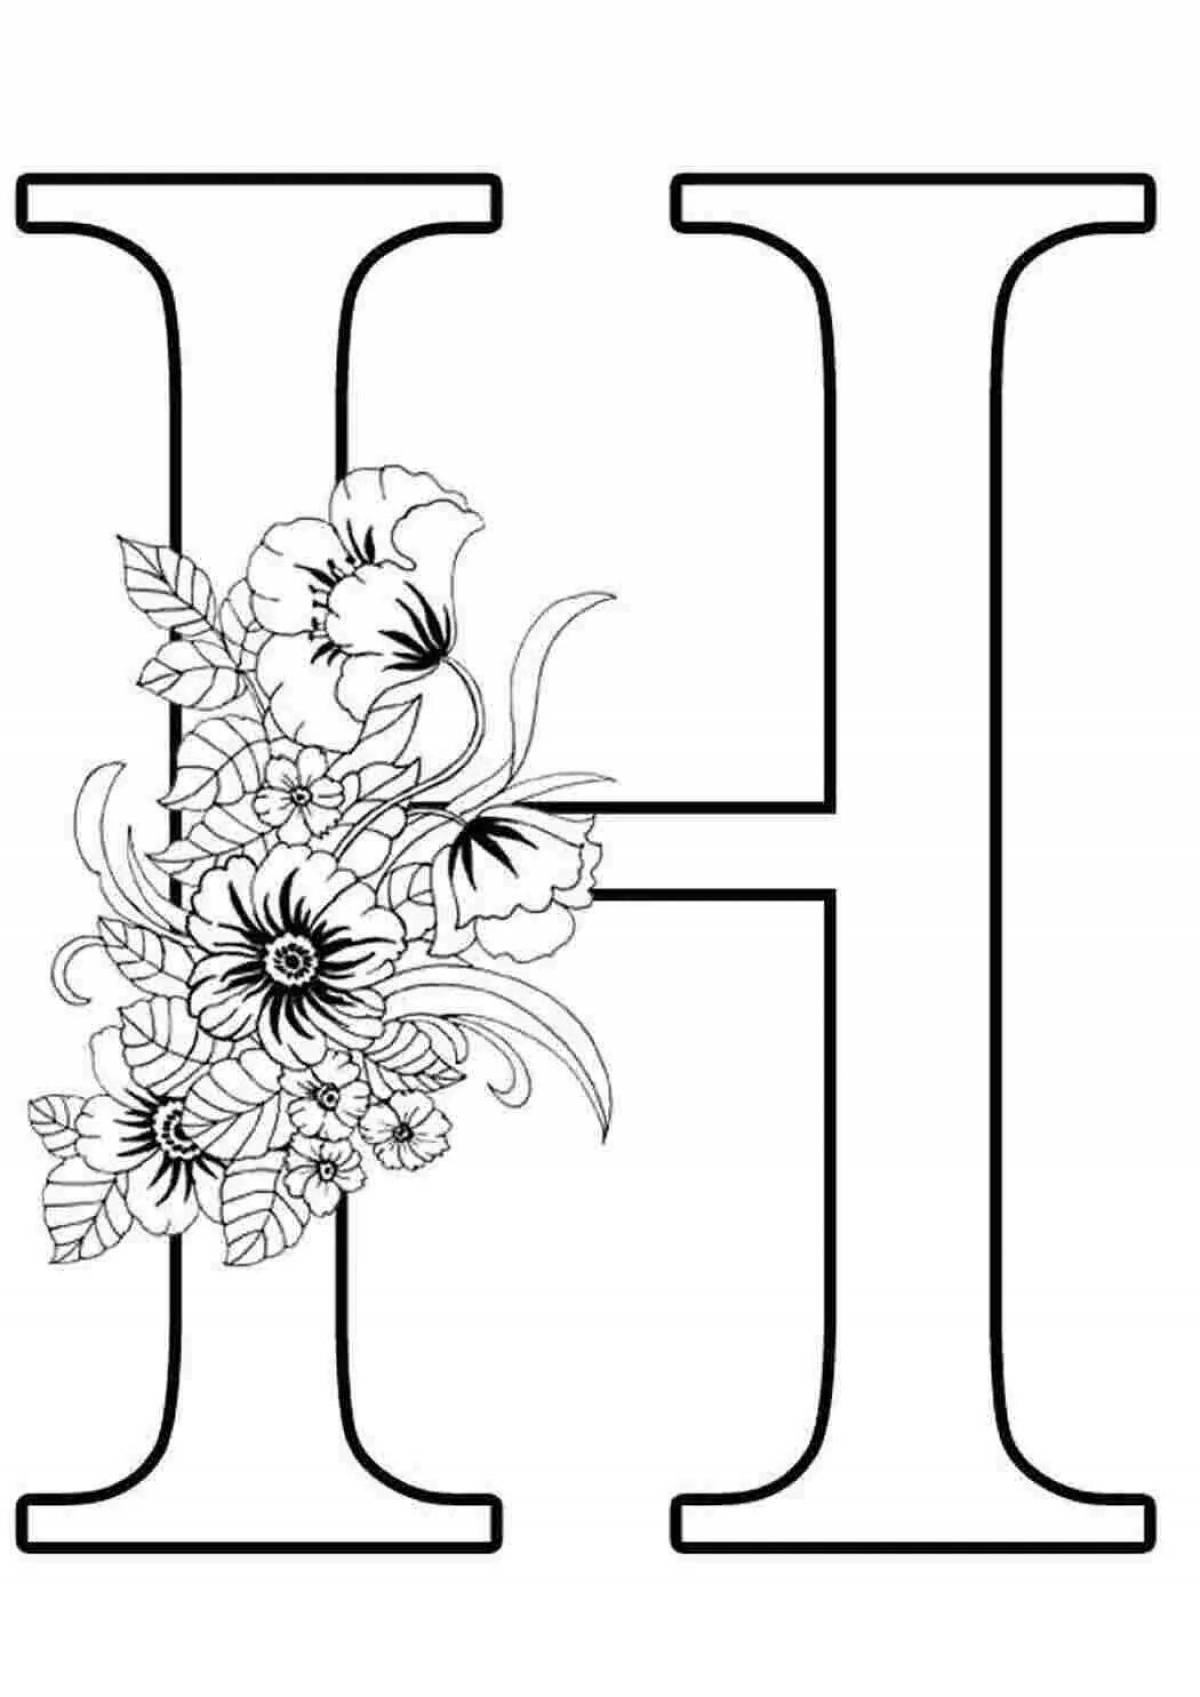 Coloring-illusion coloring page n